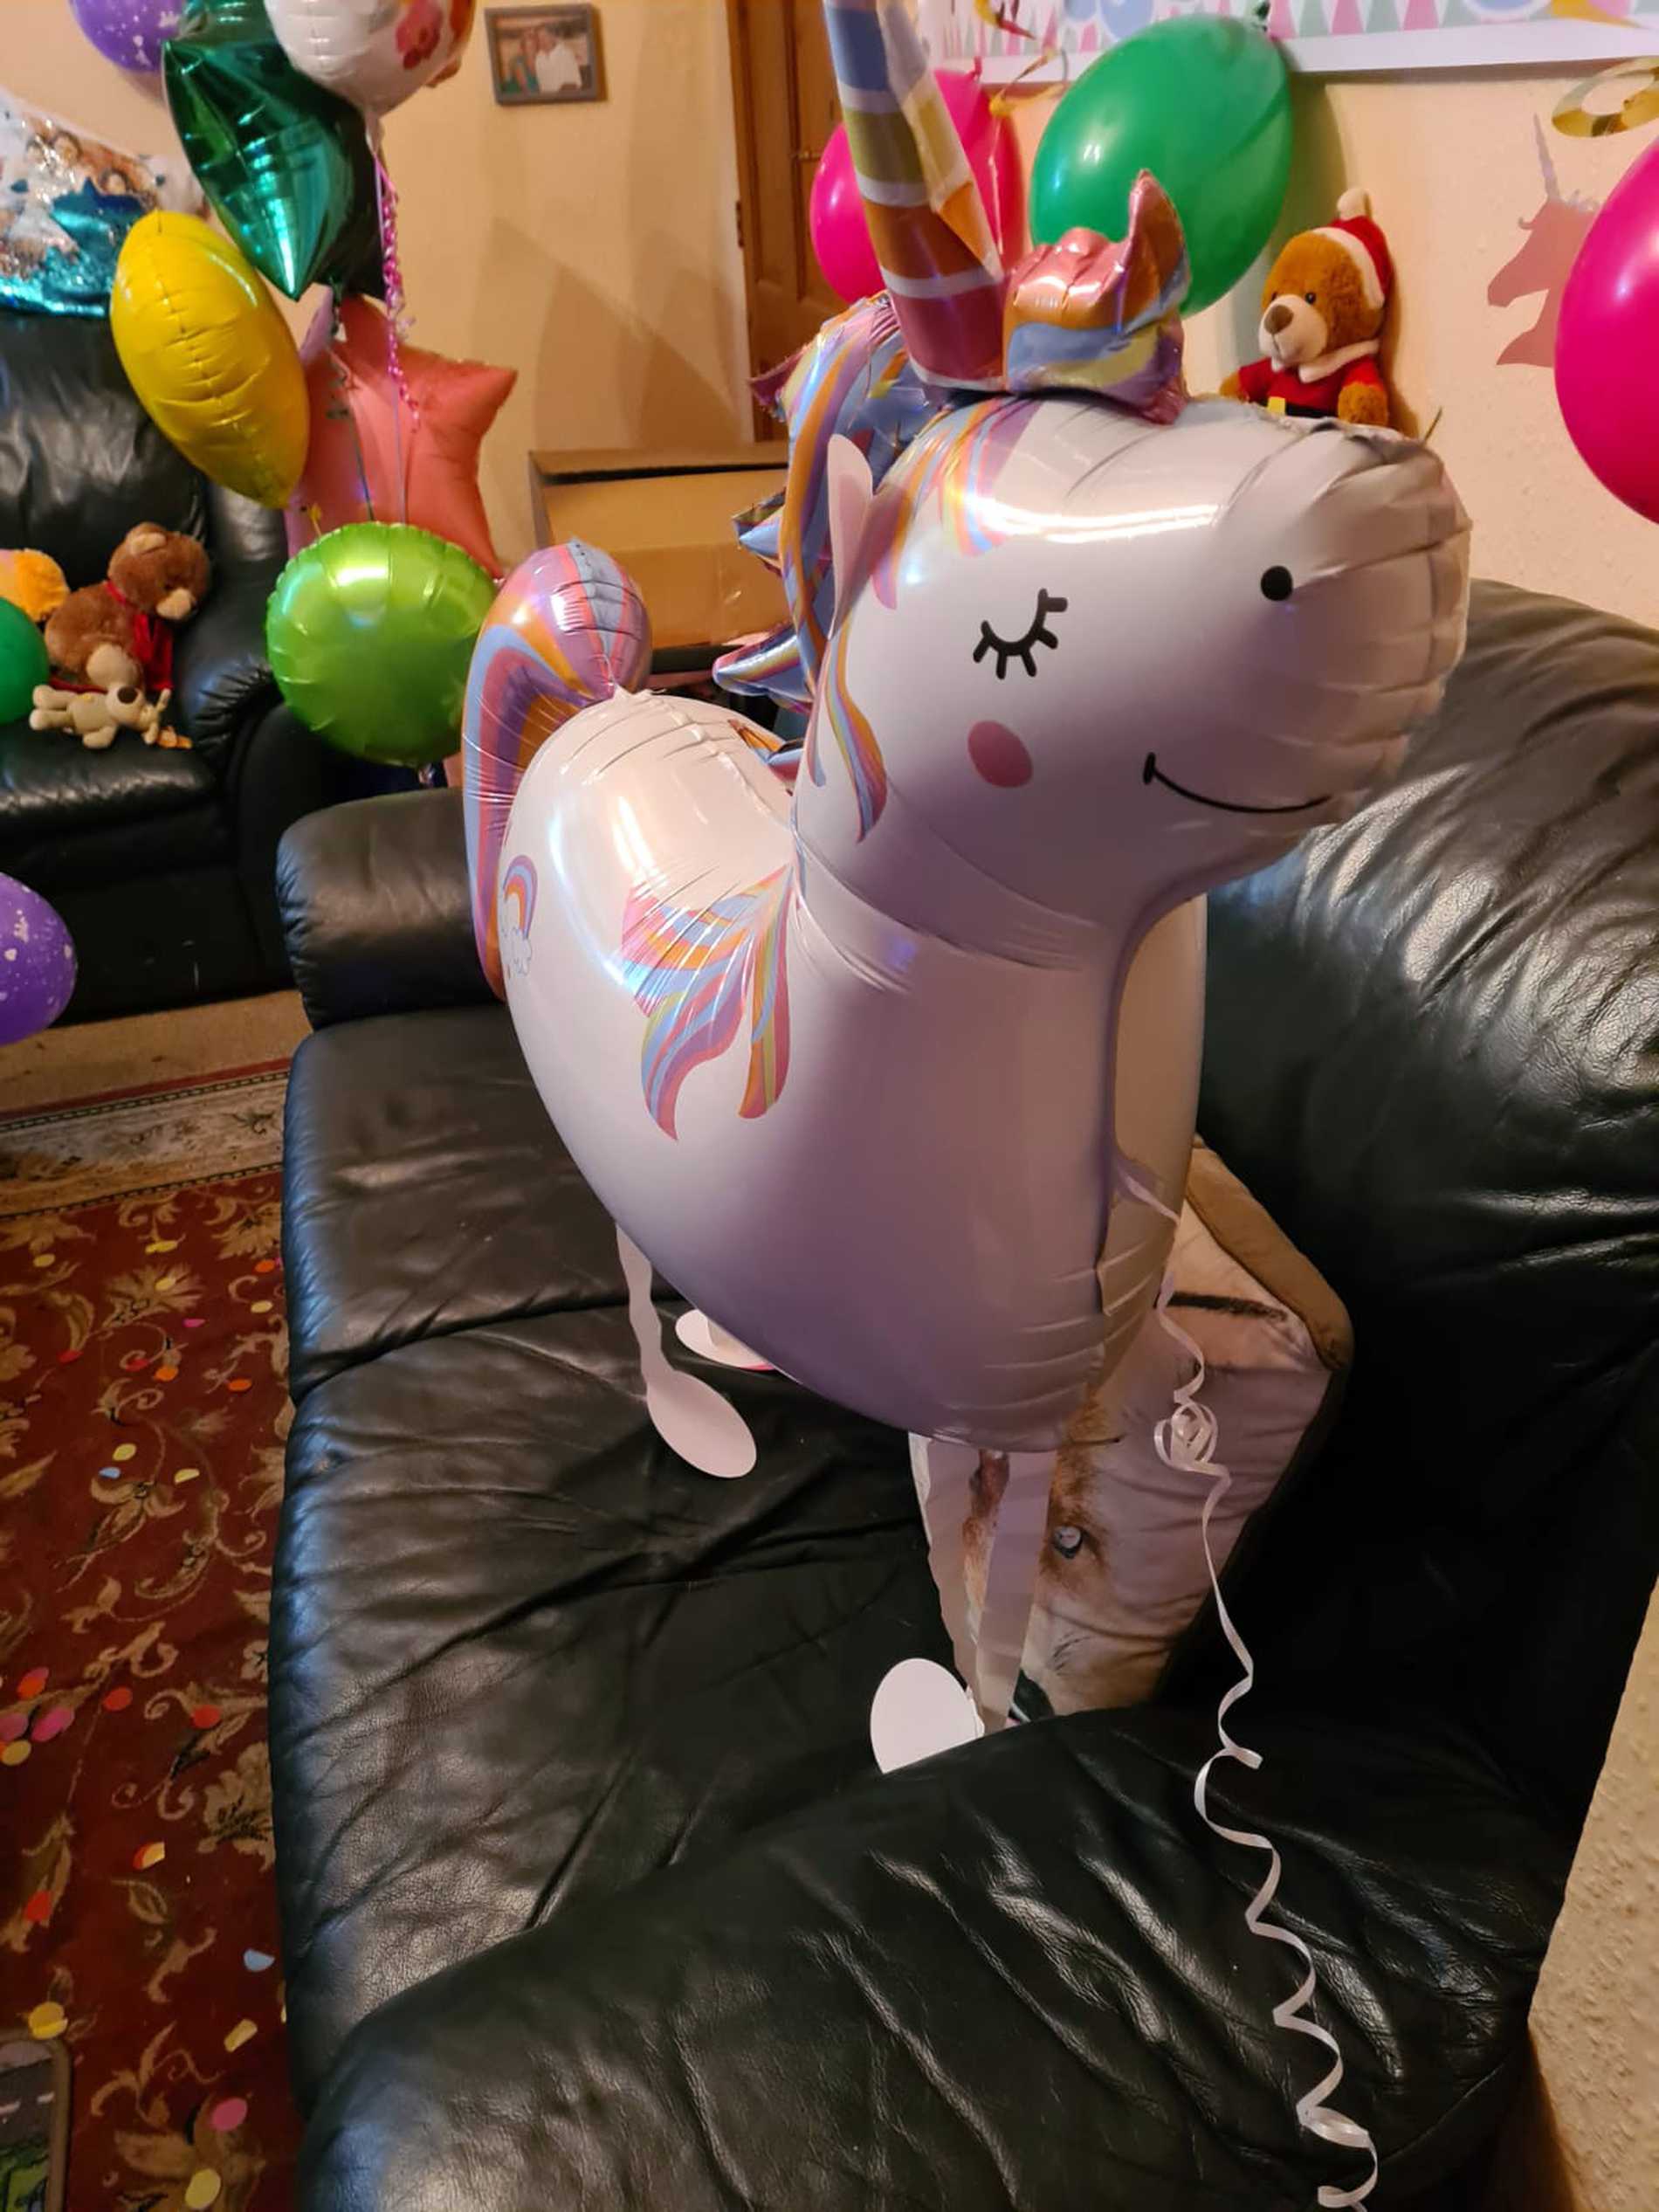 One of Leah's birthday decorations, a large unicorn balloon.